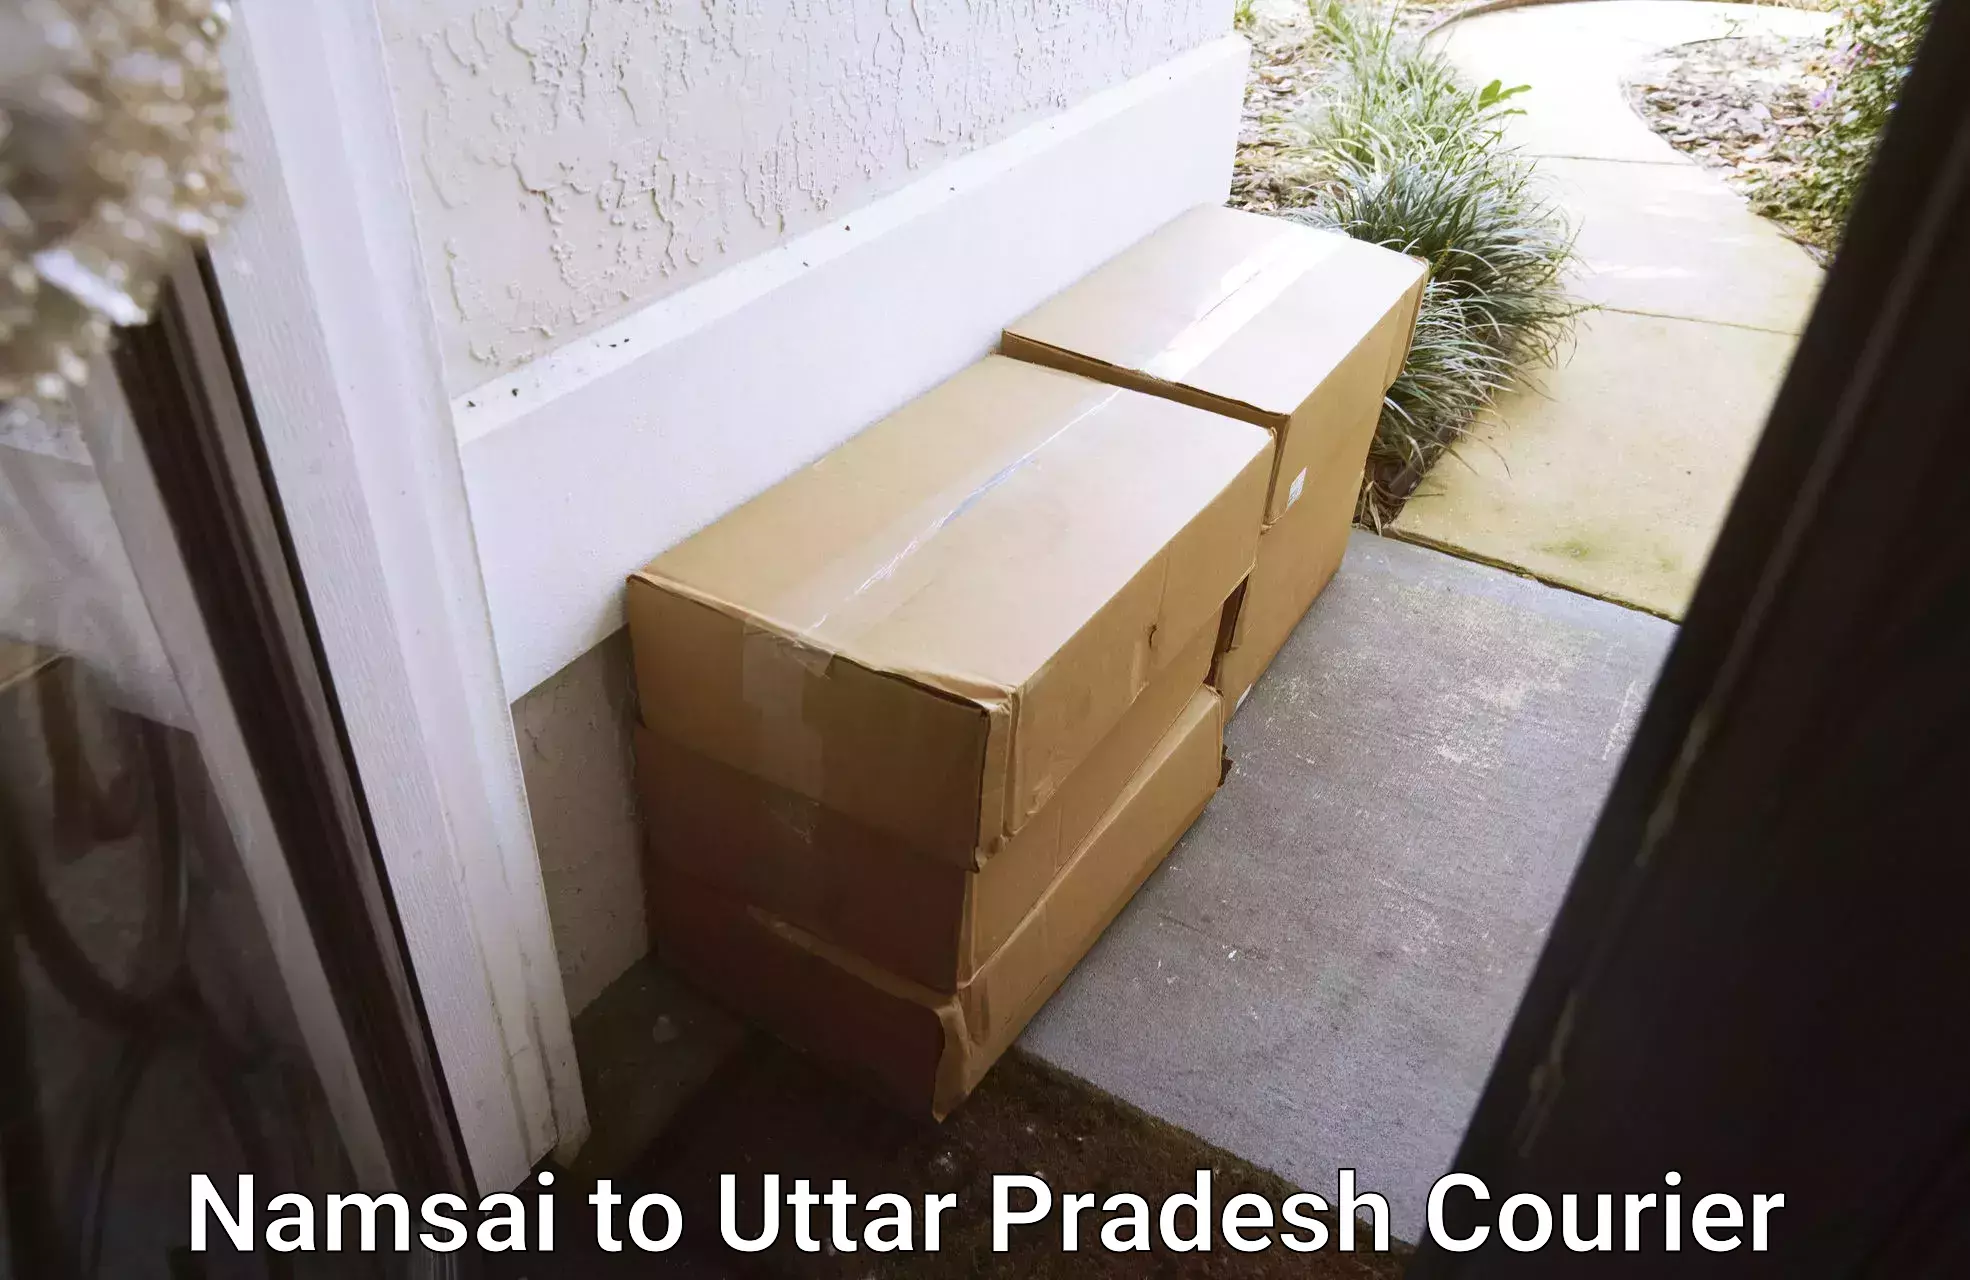 Parcel service for businesses Namsai to Aligarh Muslim University